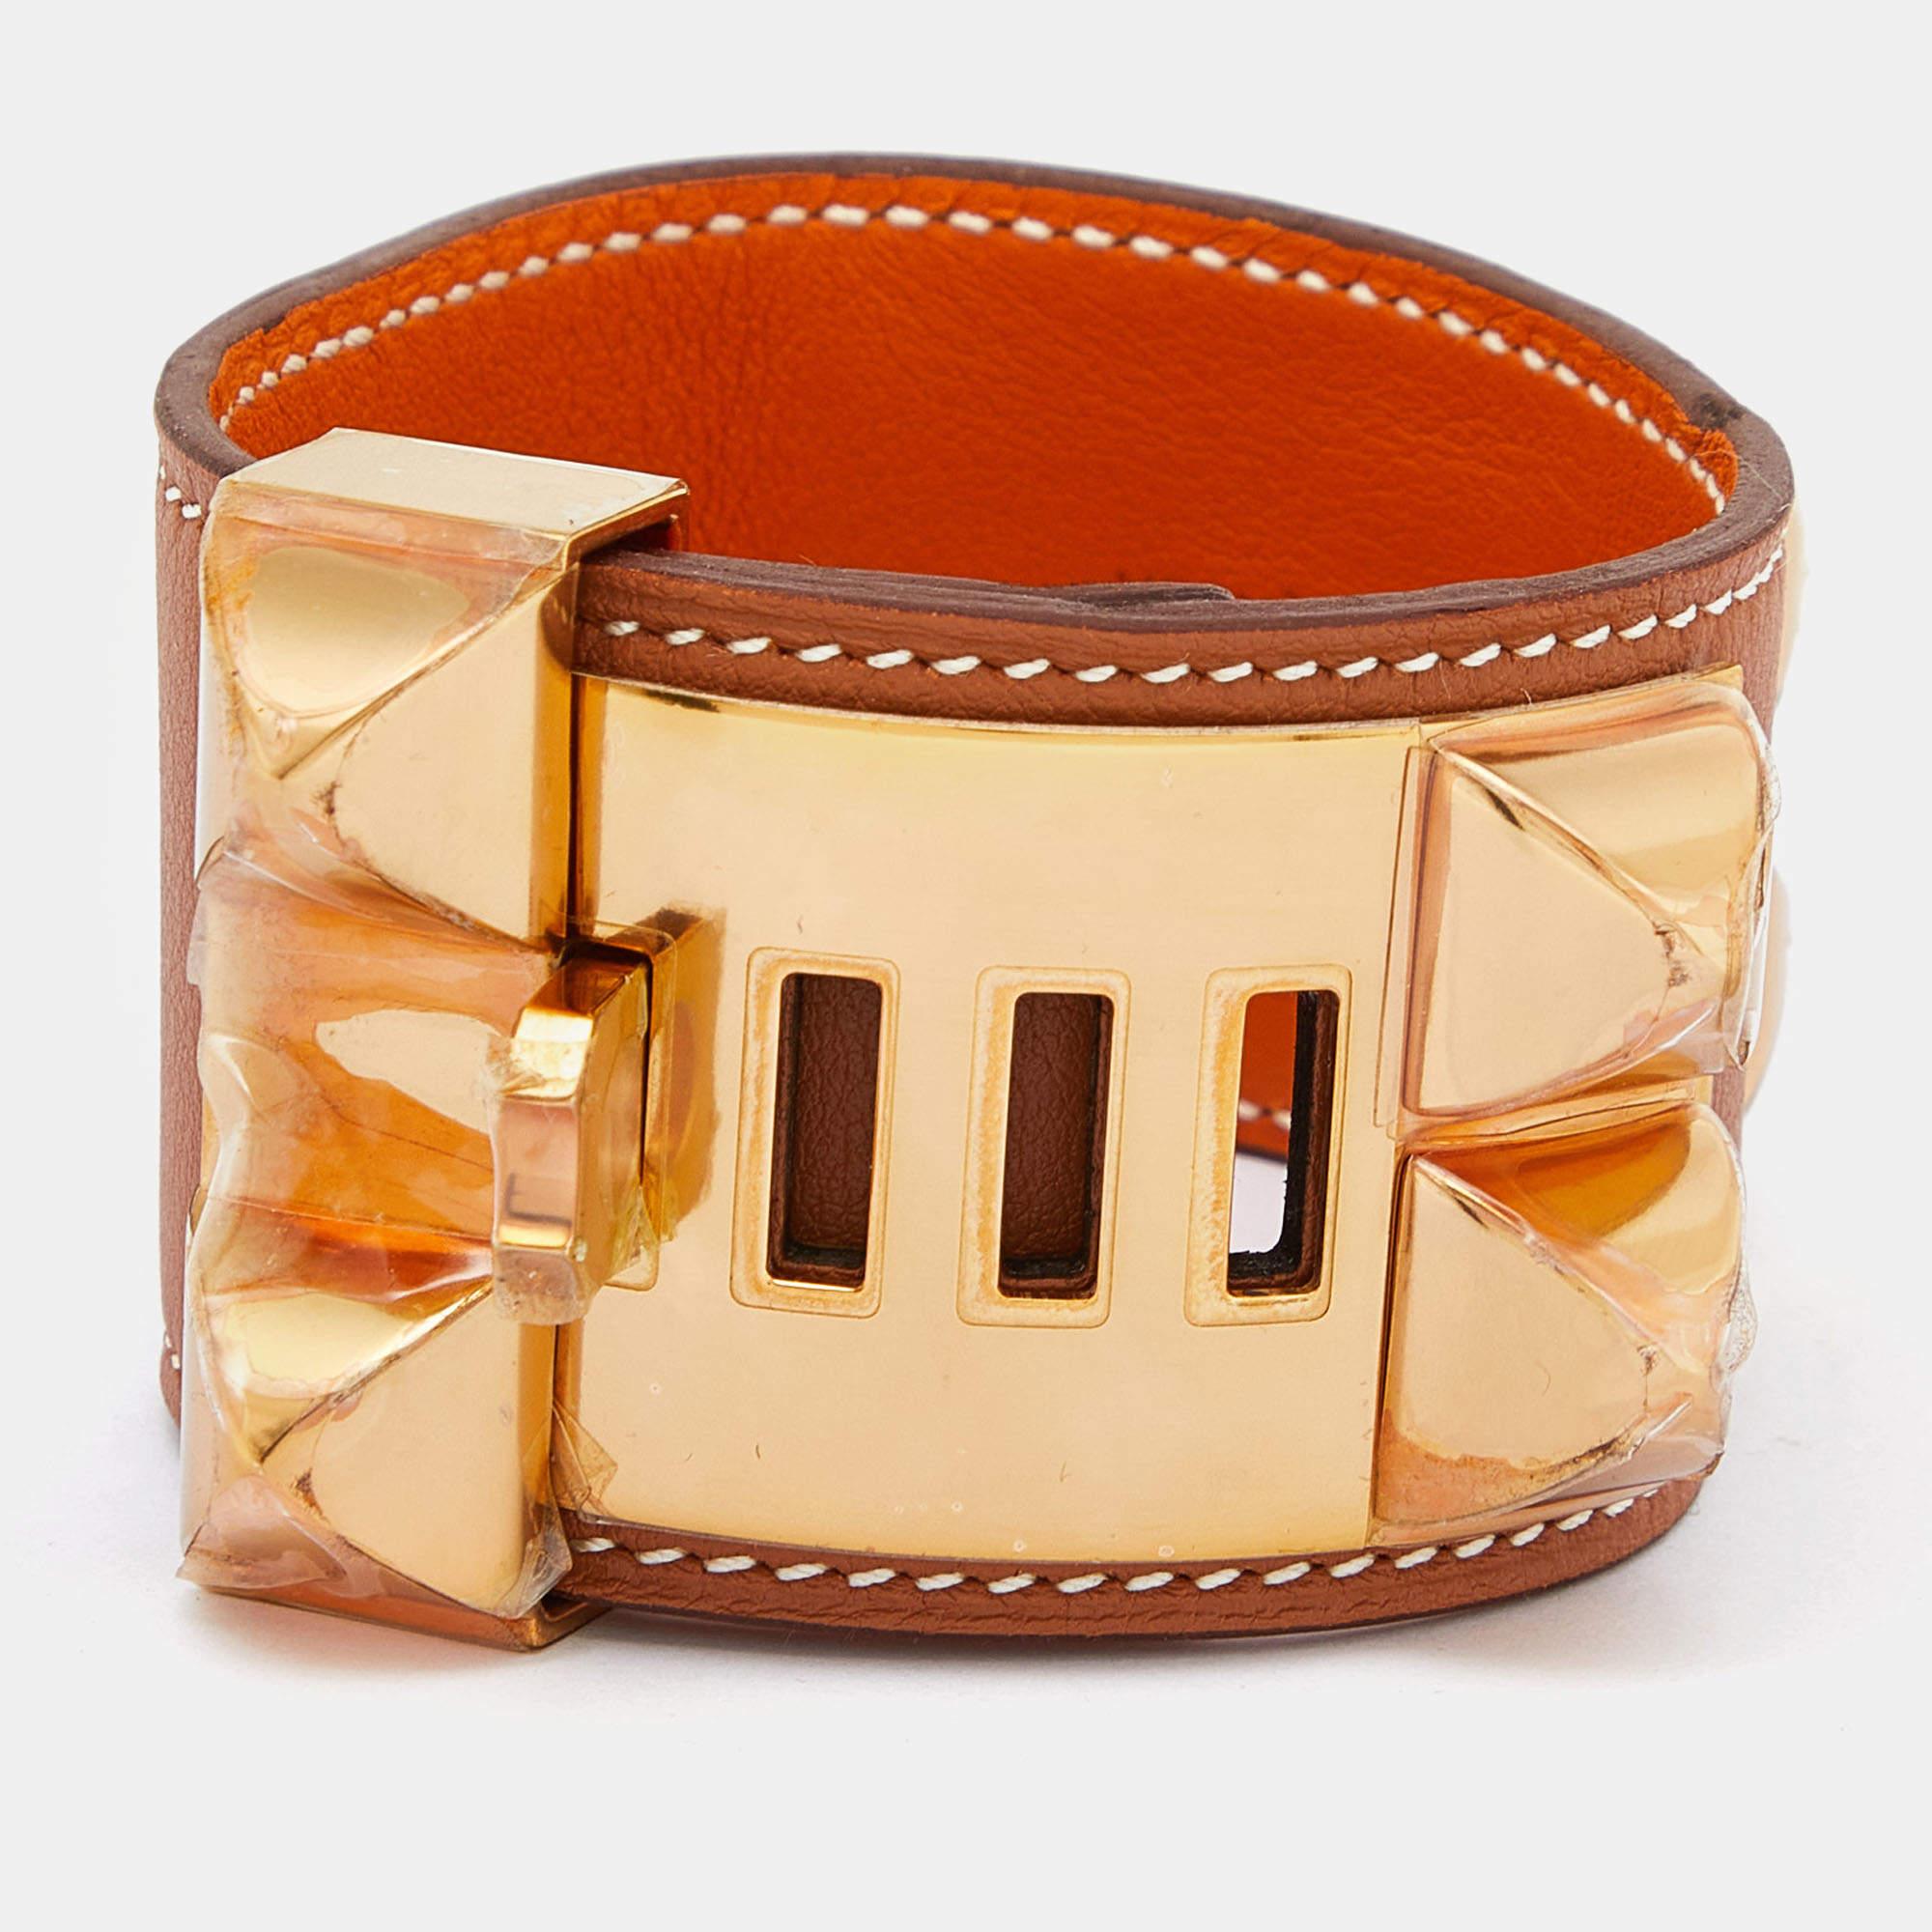 This instantly recognizable bracelet is from the signature Collier de Chien collection of Hermès. The bracelet, made of brown leather, is adorned with the iconic Collier de Chien motif in gold-plated metal featuring pyramid studs and a ring. This